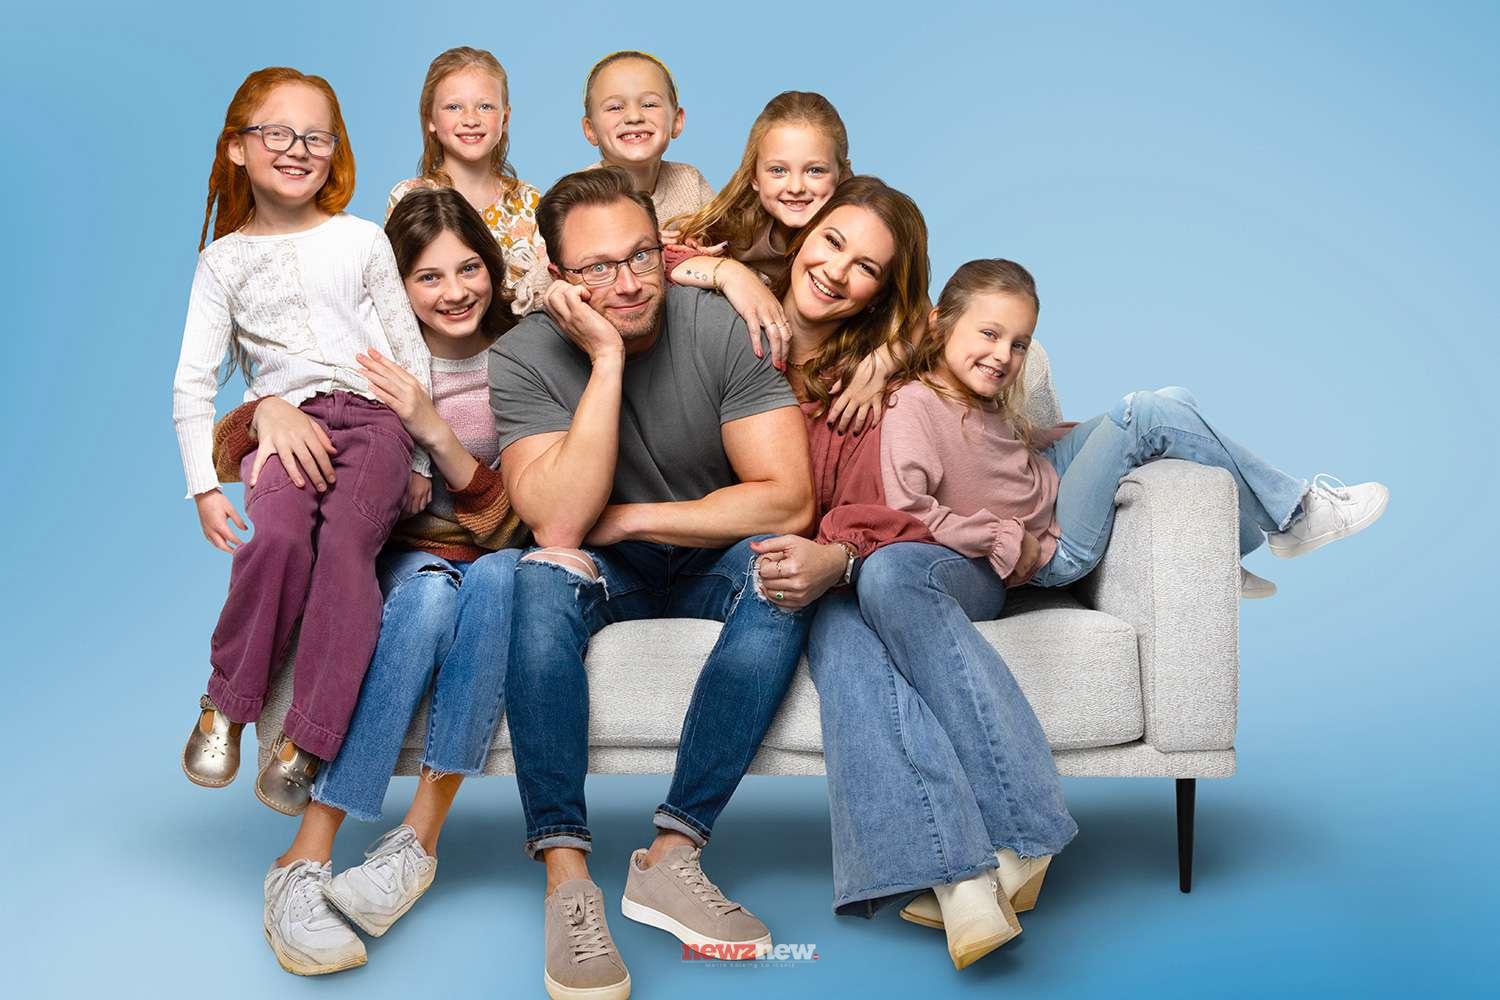 https://en.wikipedia.org/wiki/OutDaughtered